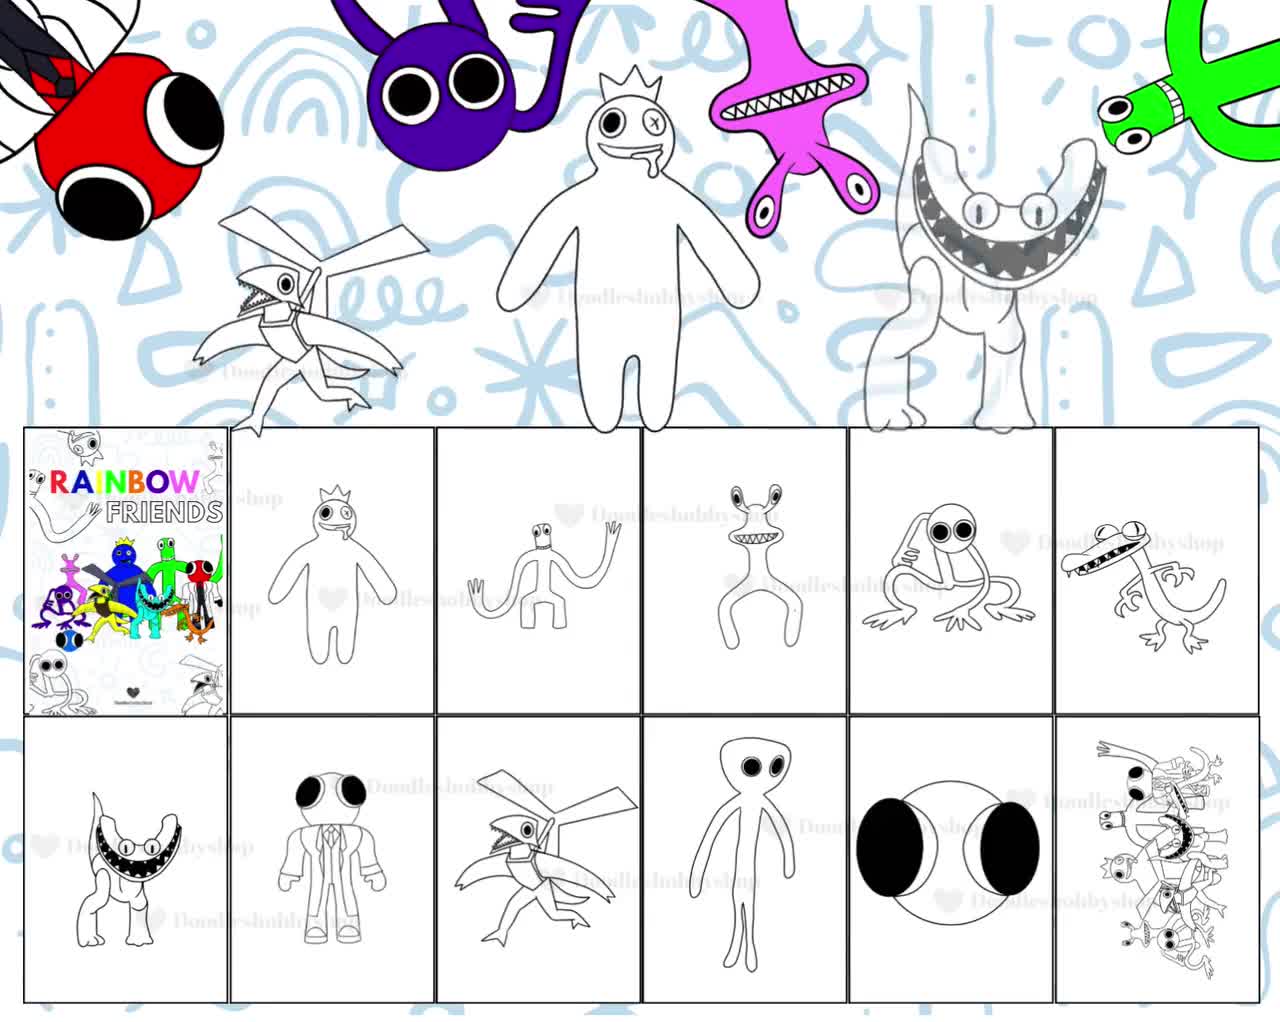 Rainbow friends roblox coloring pages pdf digital download home print ðasy to use digital coloring pages for kids